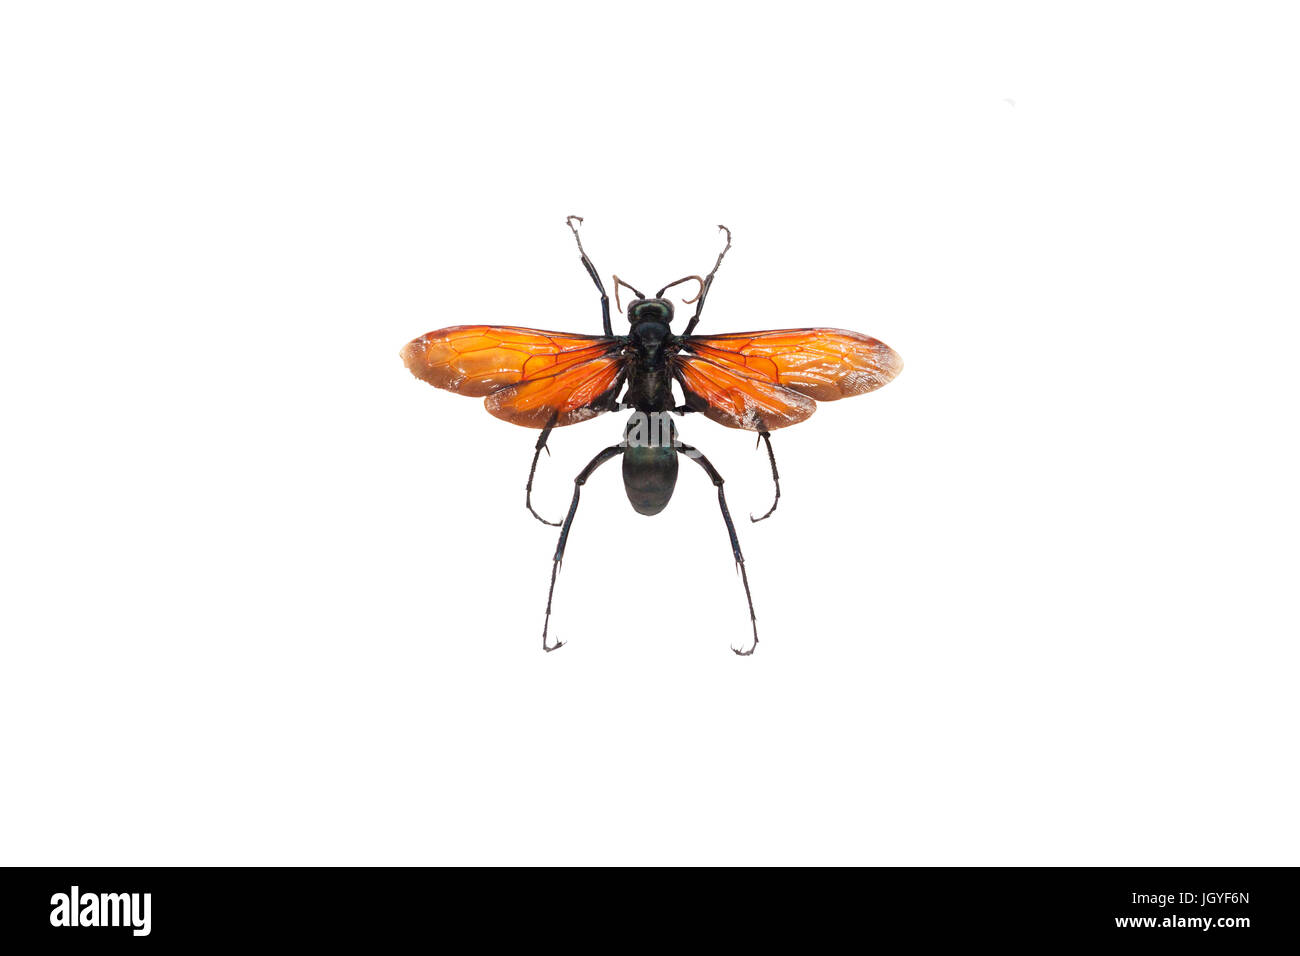 A tarantula hawk (Pepsis formosa) from French Guiana. Has one of the most painful stings in the world! Stock Photo